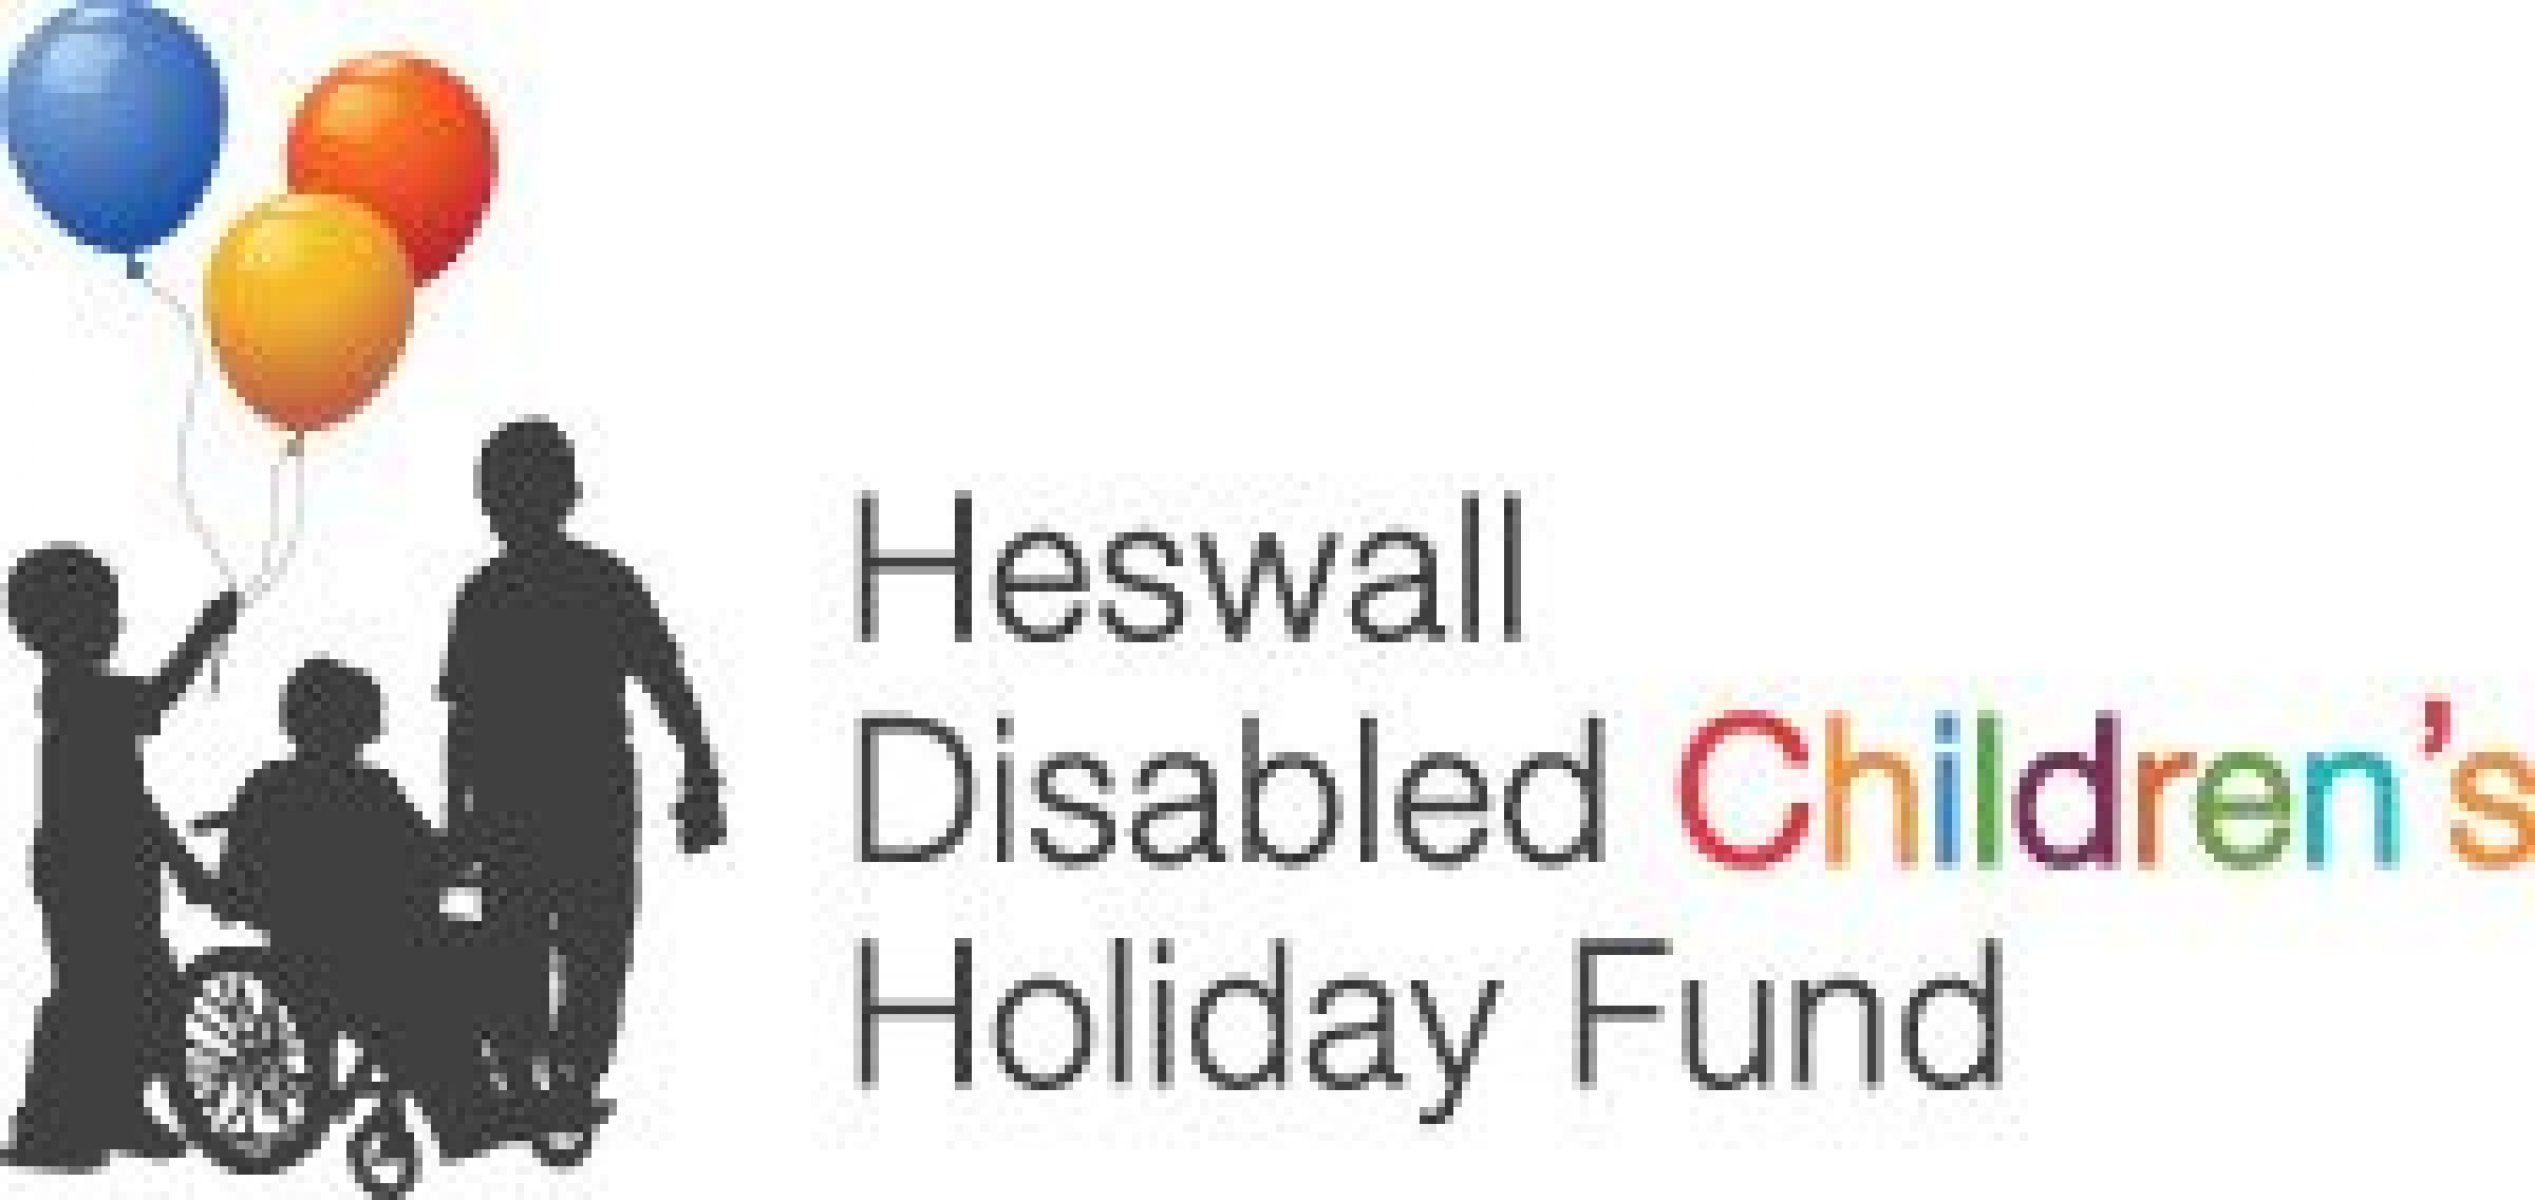 Heswall Disabled Children’s Holiday Fund eCards